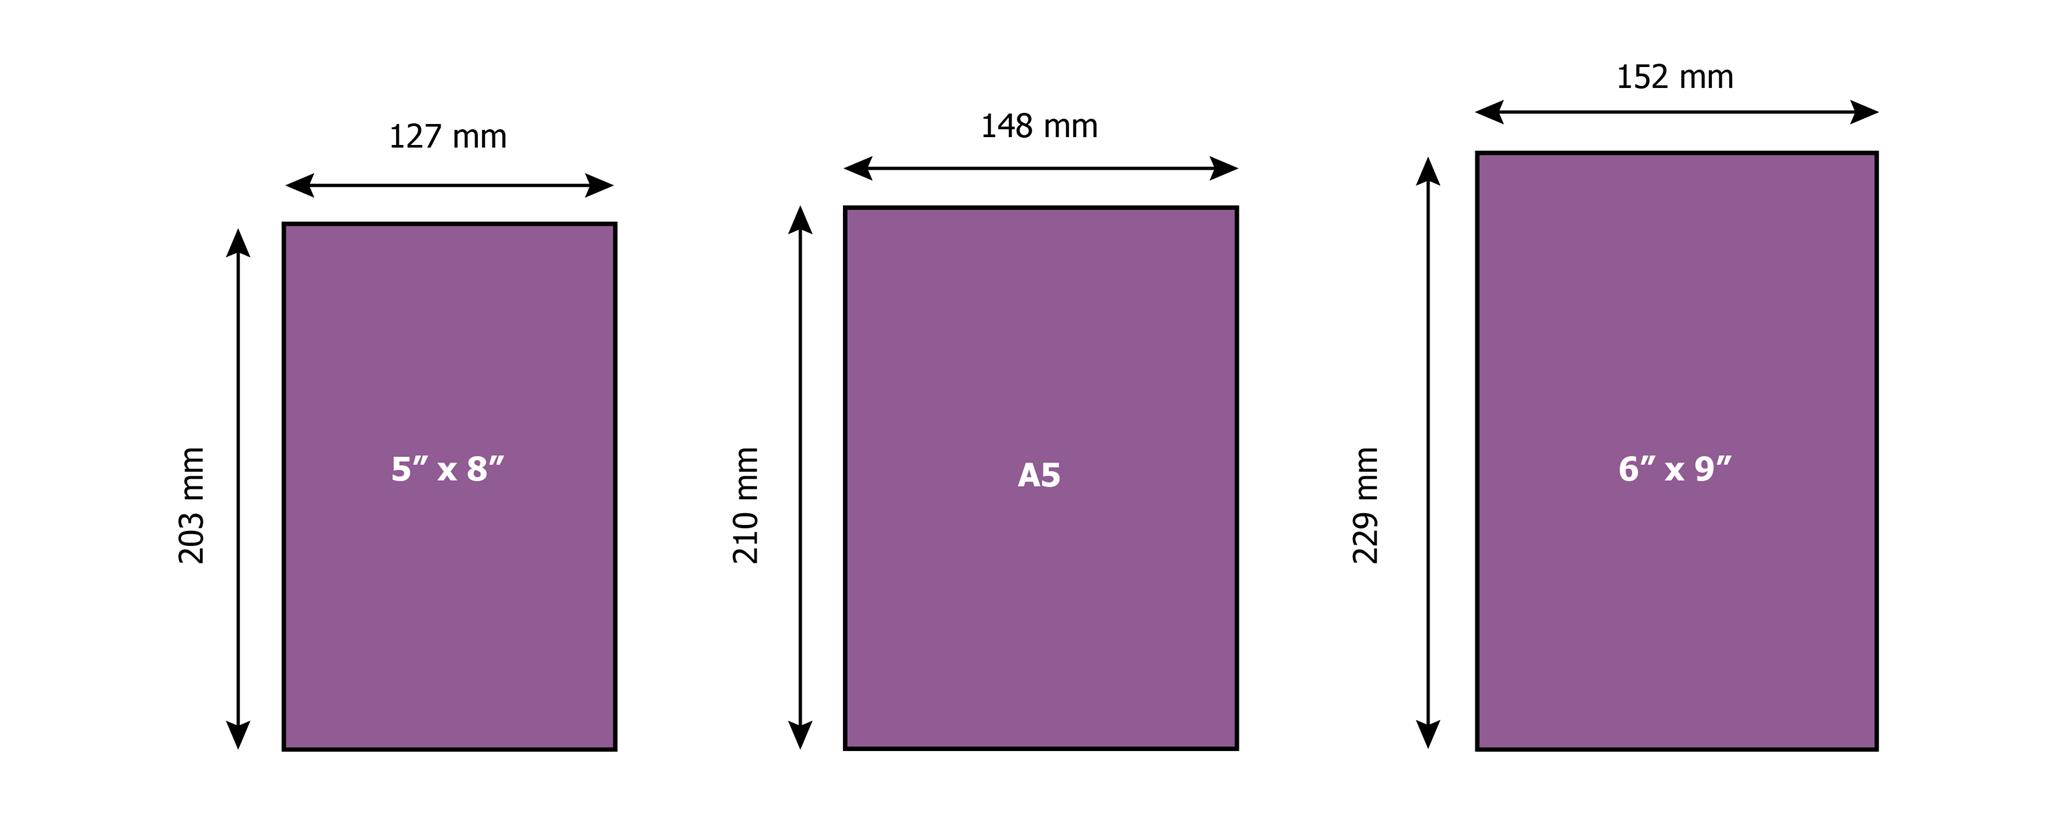 does final print size matter in document illustrator